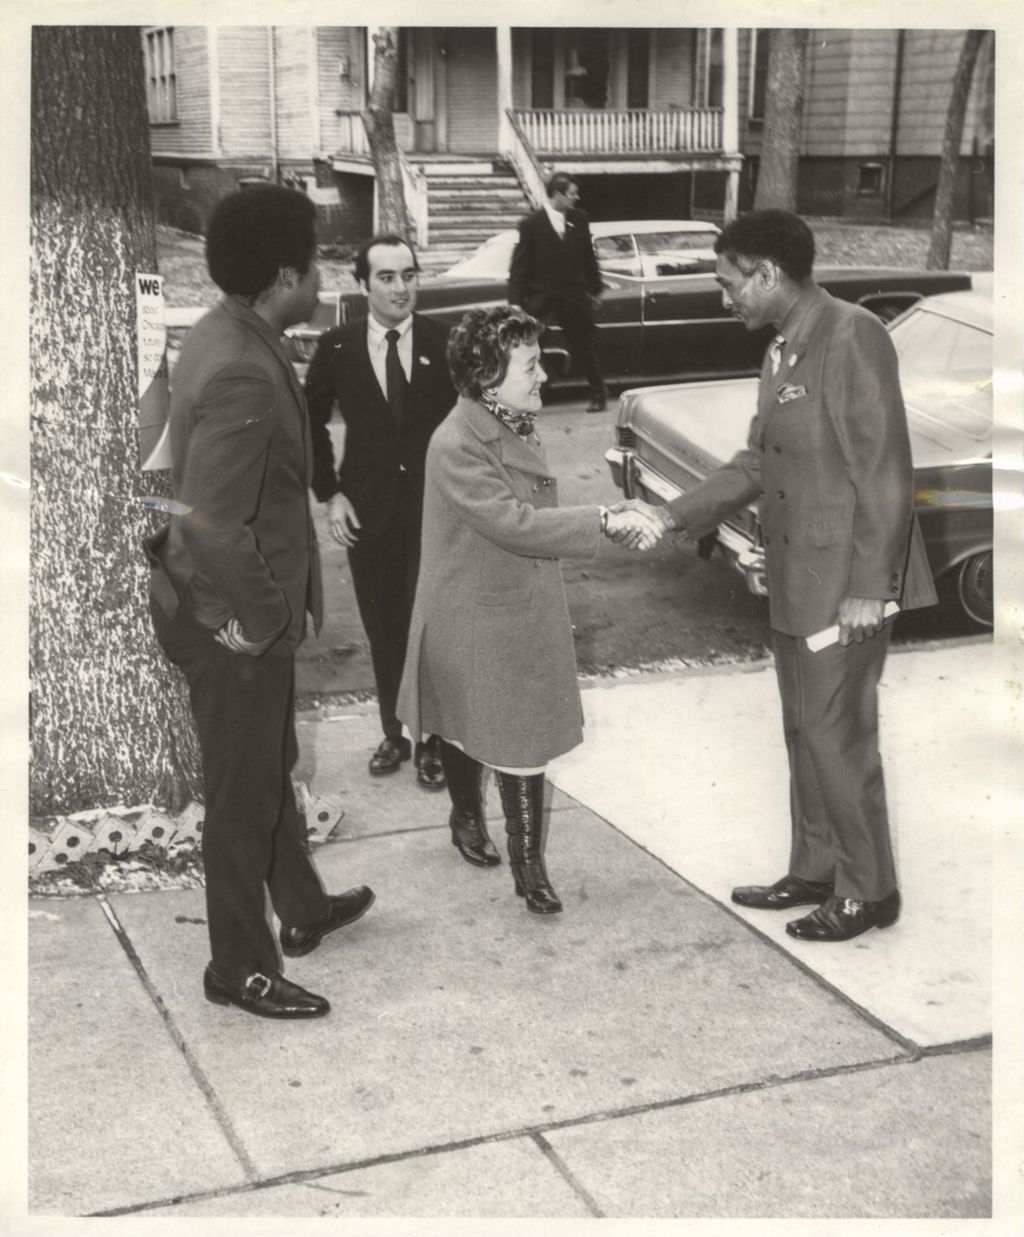 Eleanor Daley shaking hands with a man during the "We Care" campaign